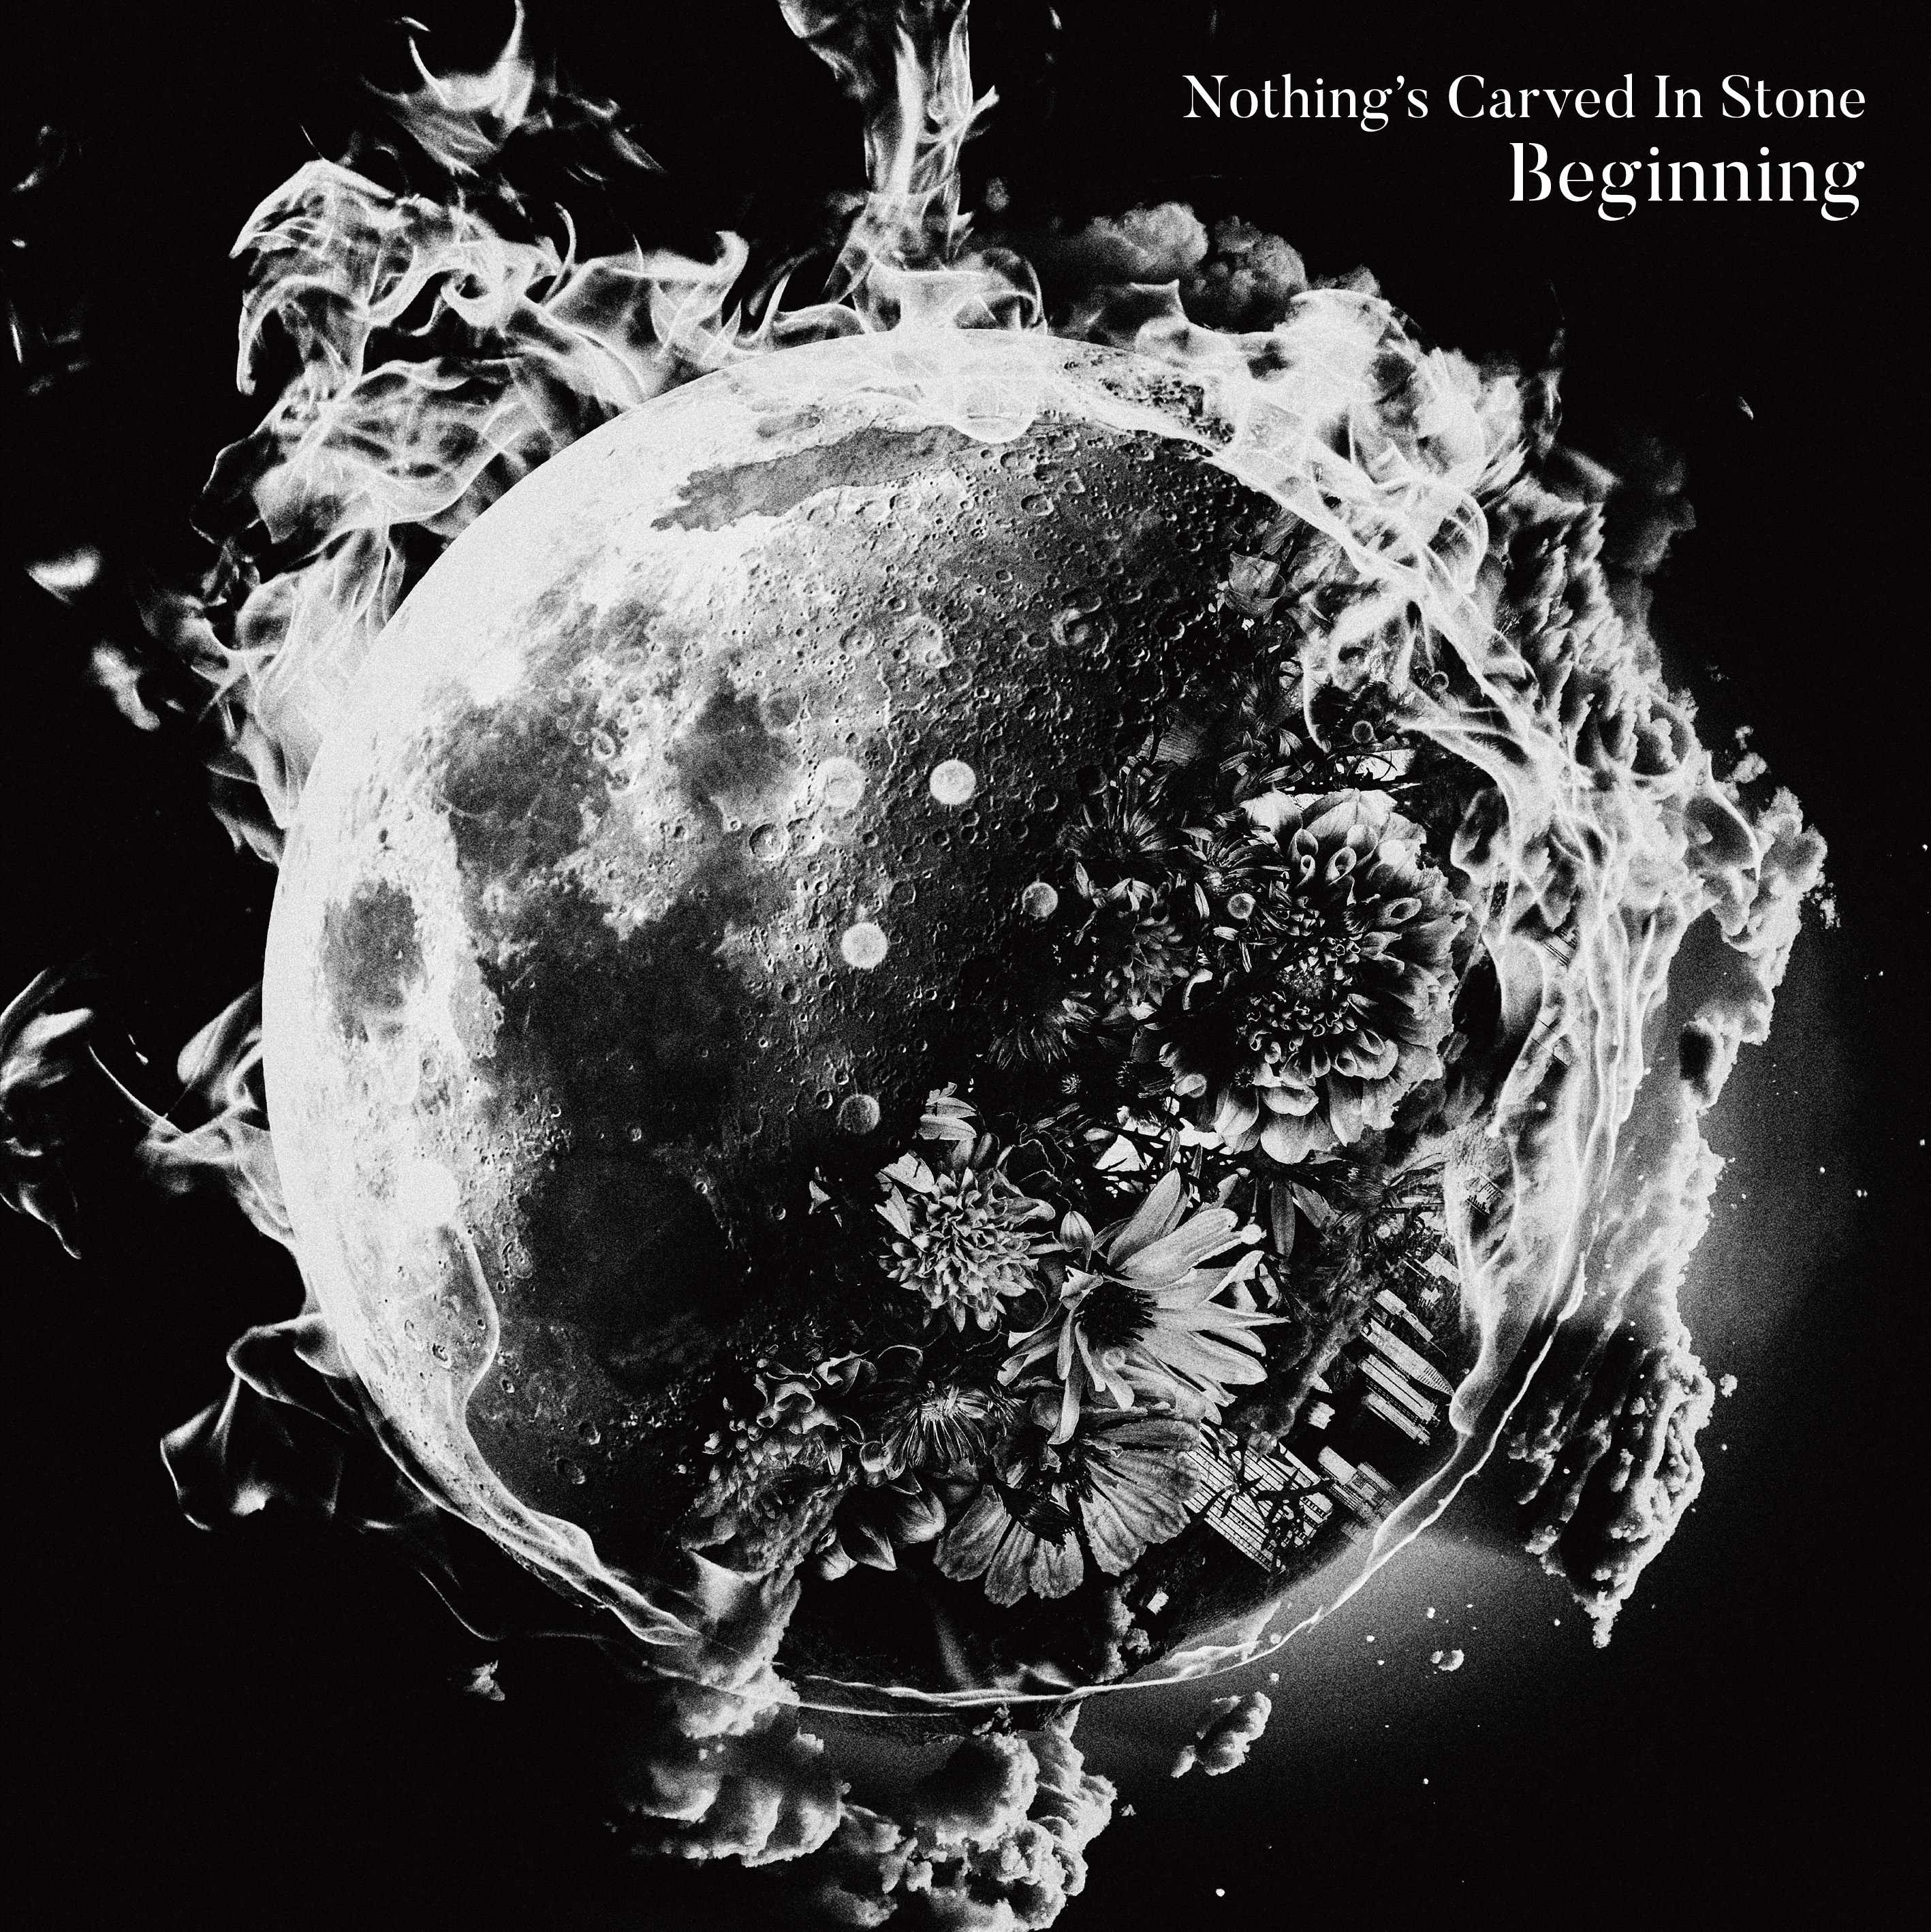 Carved in stone. Nothing's Carved in Stone. Out of Control nothing's Carved in Stone. Nothing's Carved in Stone「Wonderer」 обложка. Nothing's Carved in Stone out of Control OST.